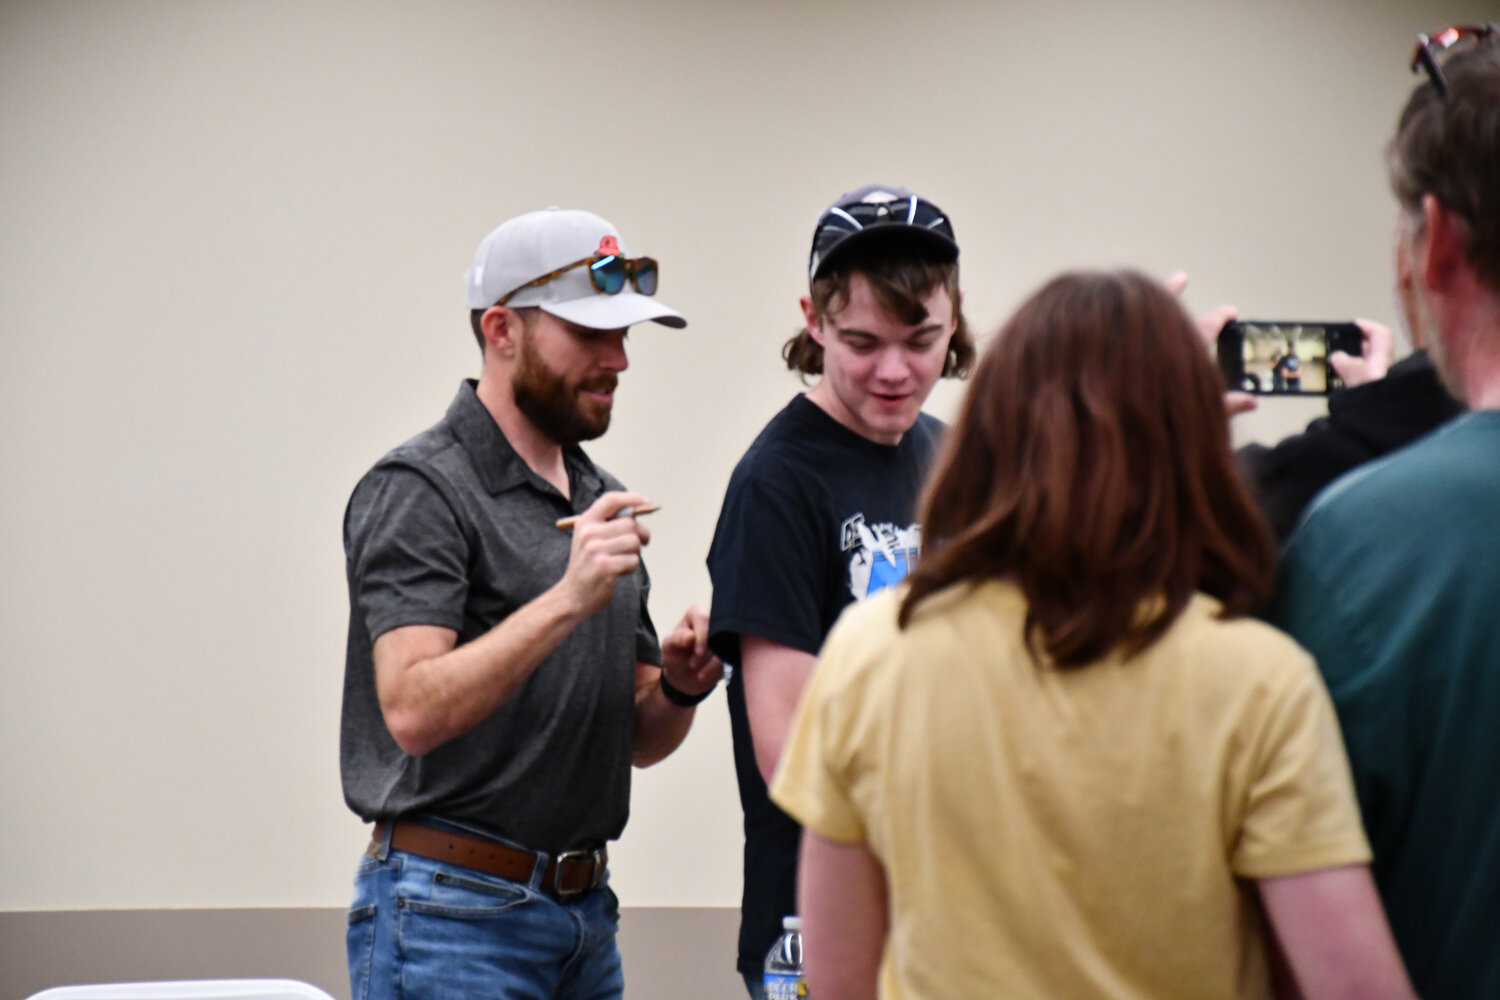 Ross Chastain, left, signed autographs for several fans Thursday at the Delaware Agricultural Museum and Village.